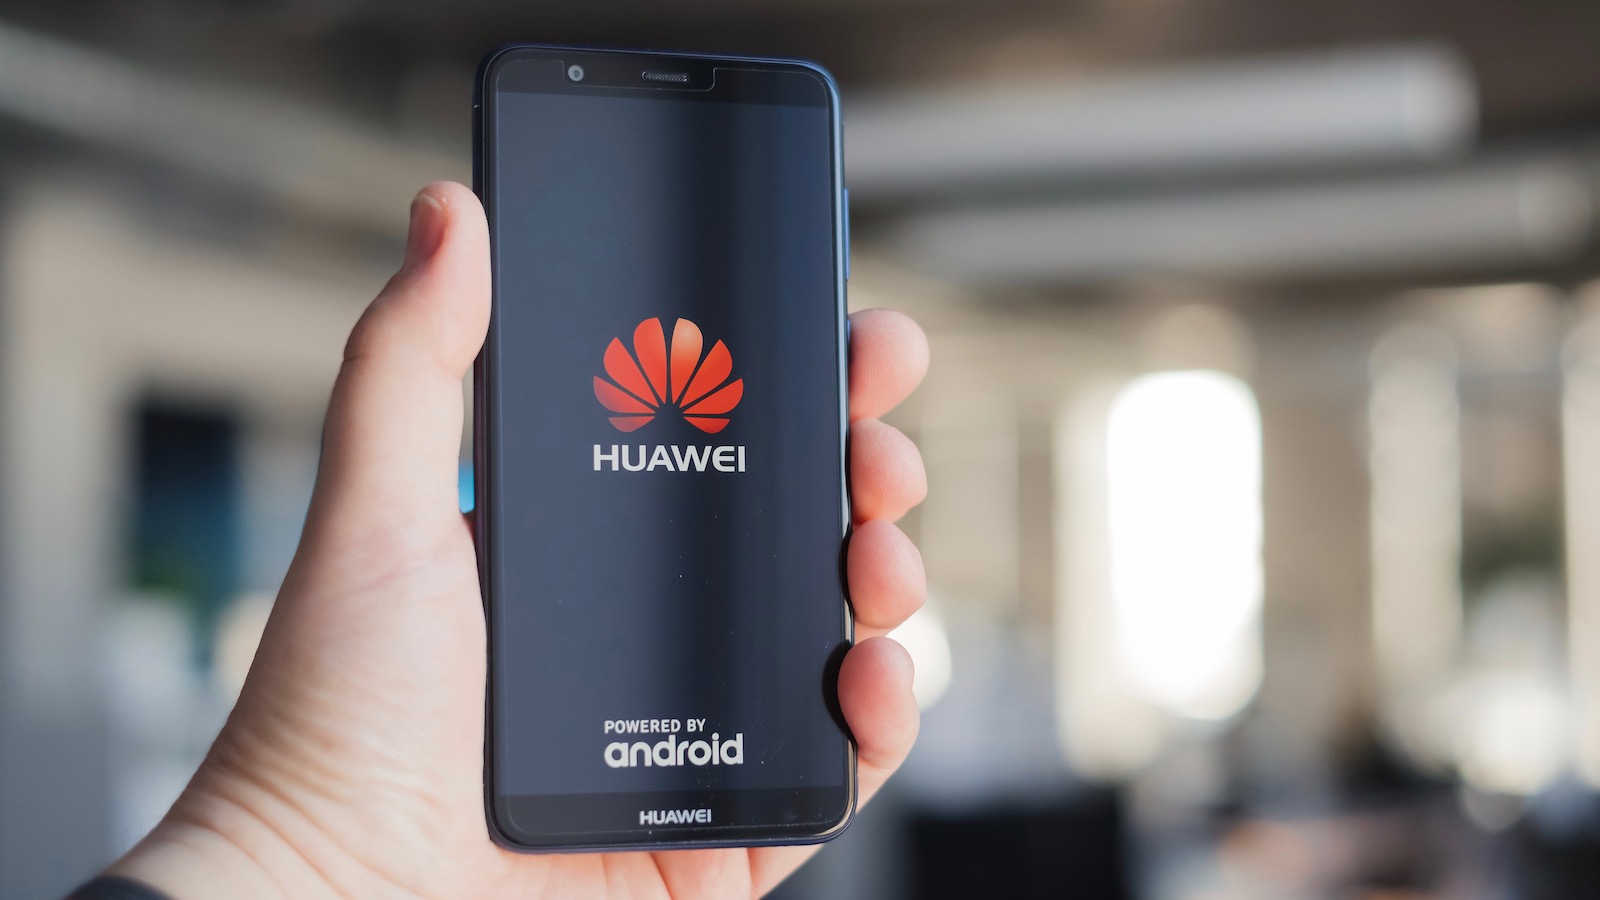 What does Google’s decision to ban Huawei from Android mean for the Chinese tech giant?